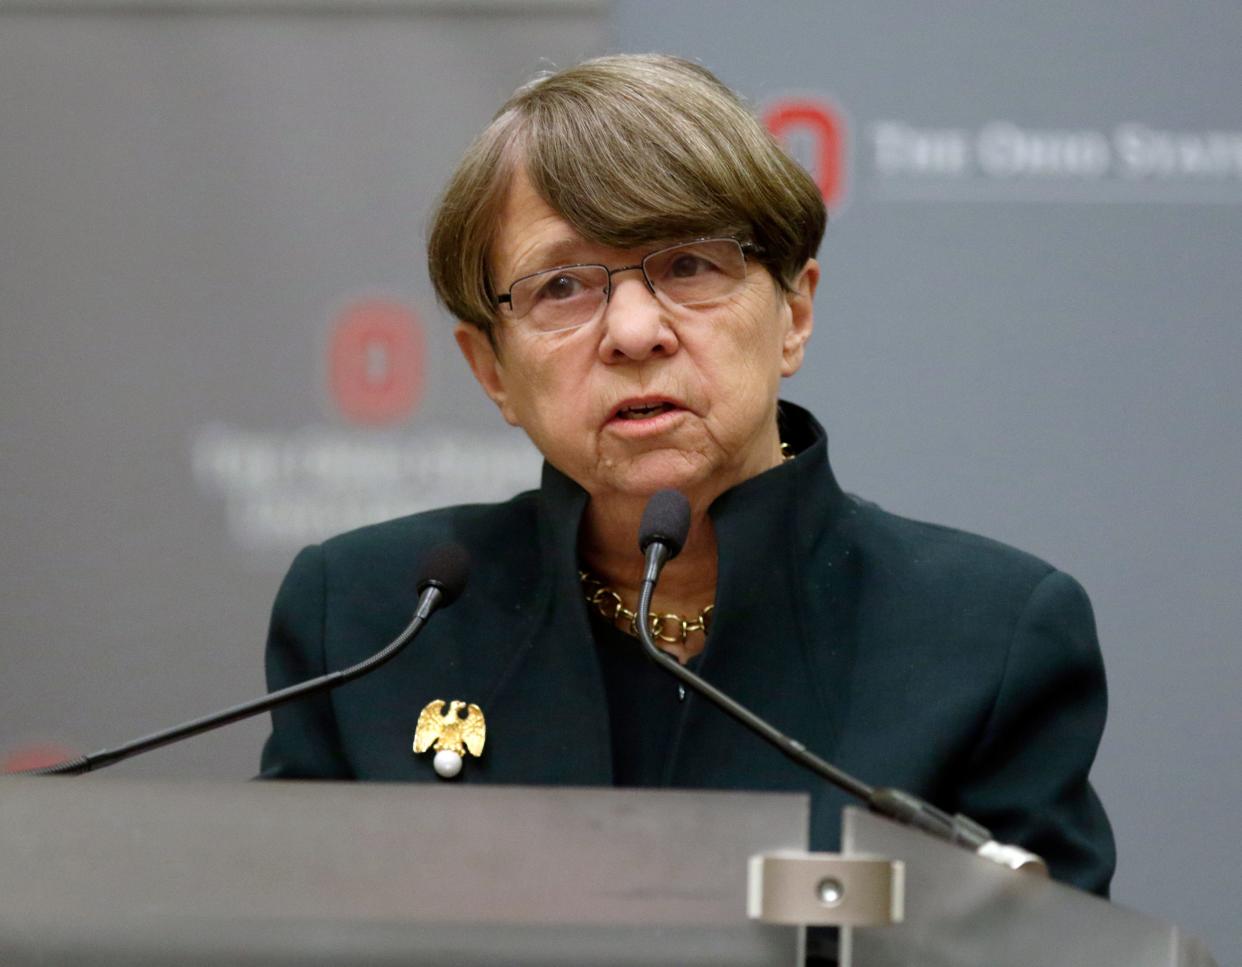 Mary Jo White speaks during a news conference in Columbus, Ohio, in August of 2018. The NFL has hired former Securities and Exchange Commission chair White to investigate an allegation that Washington Commanders owner Dan Snyder sexually harassed a team employee more than a decade ago. (AP Photo/Paul Vernon, File)